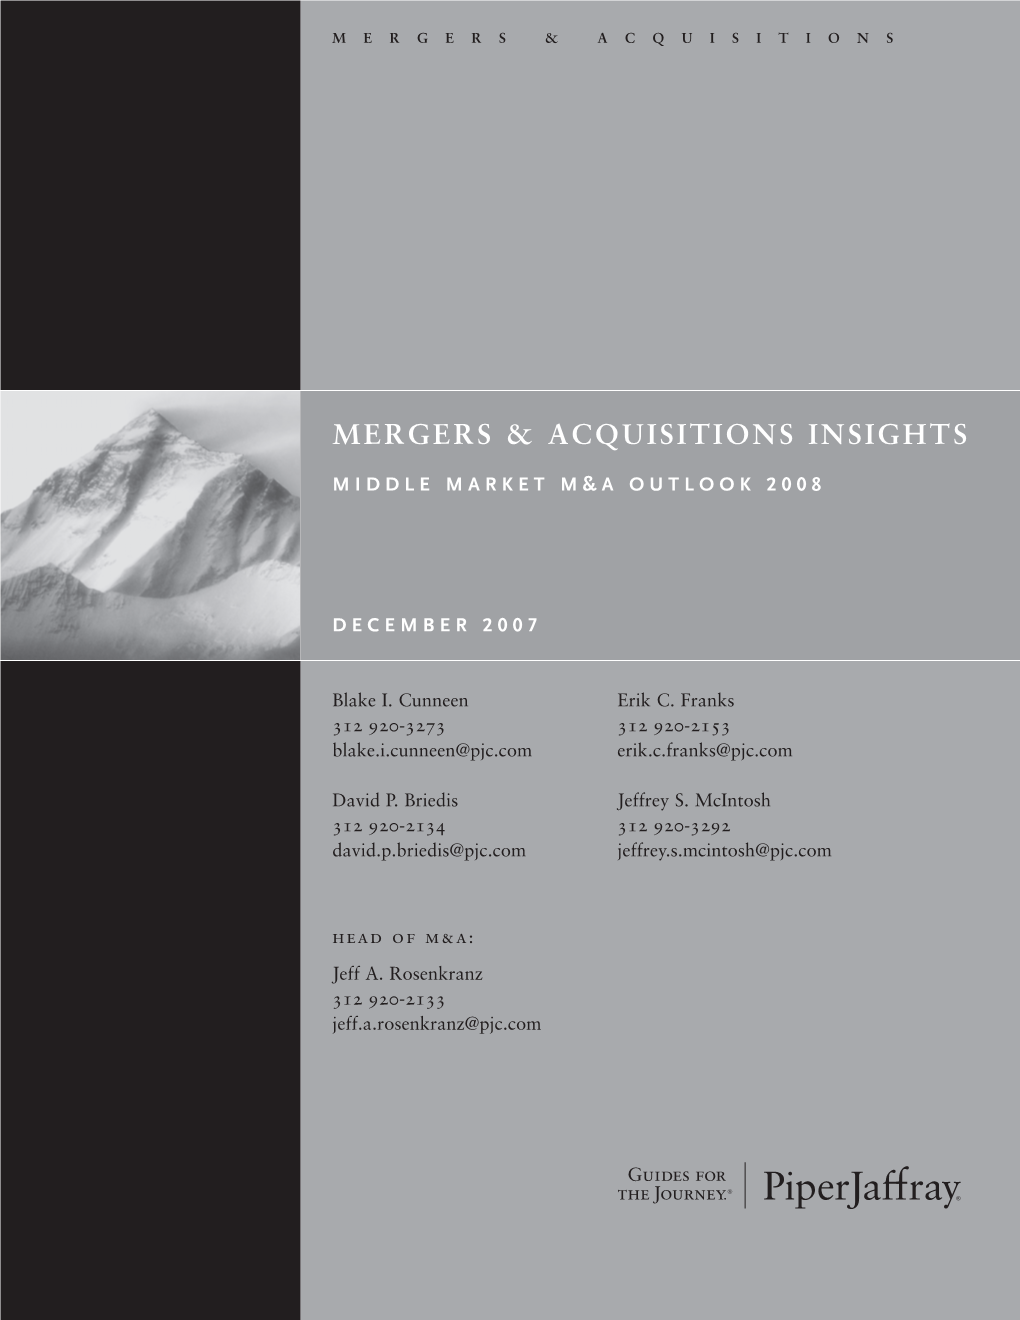 Mergers & Acquisitions Insights